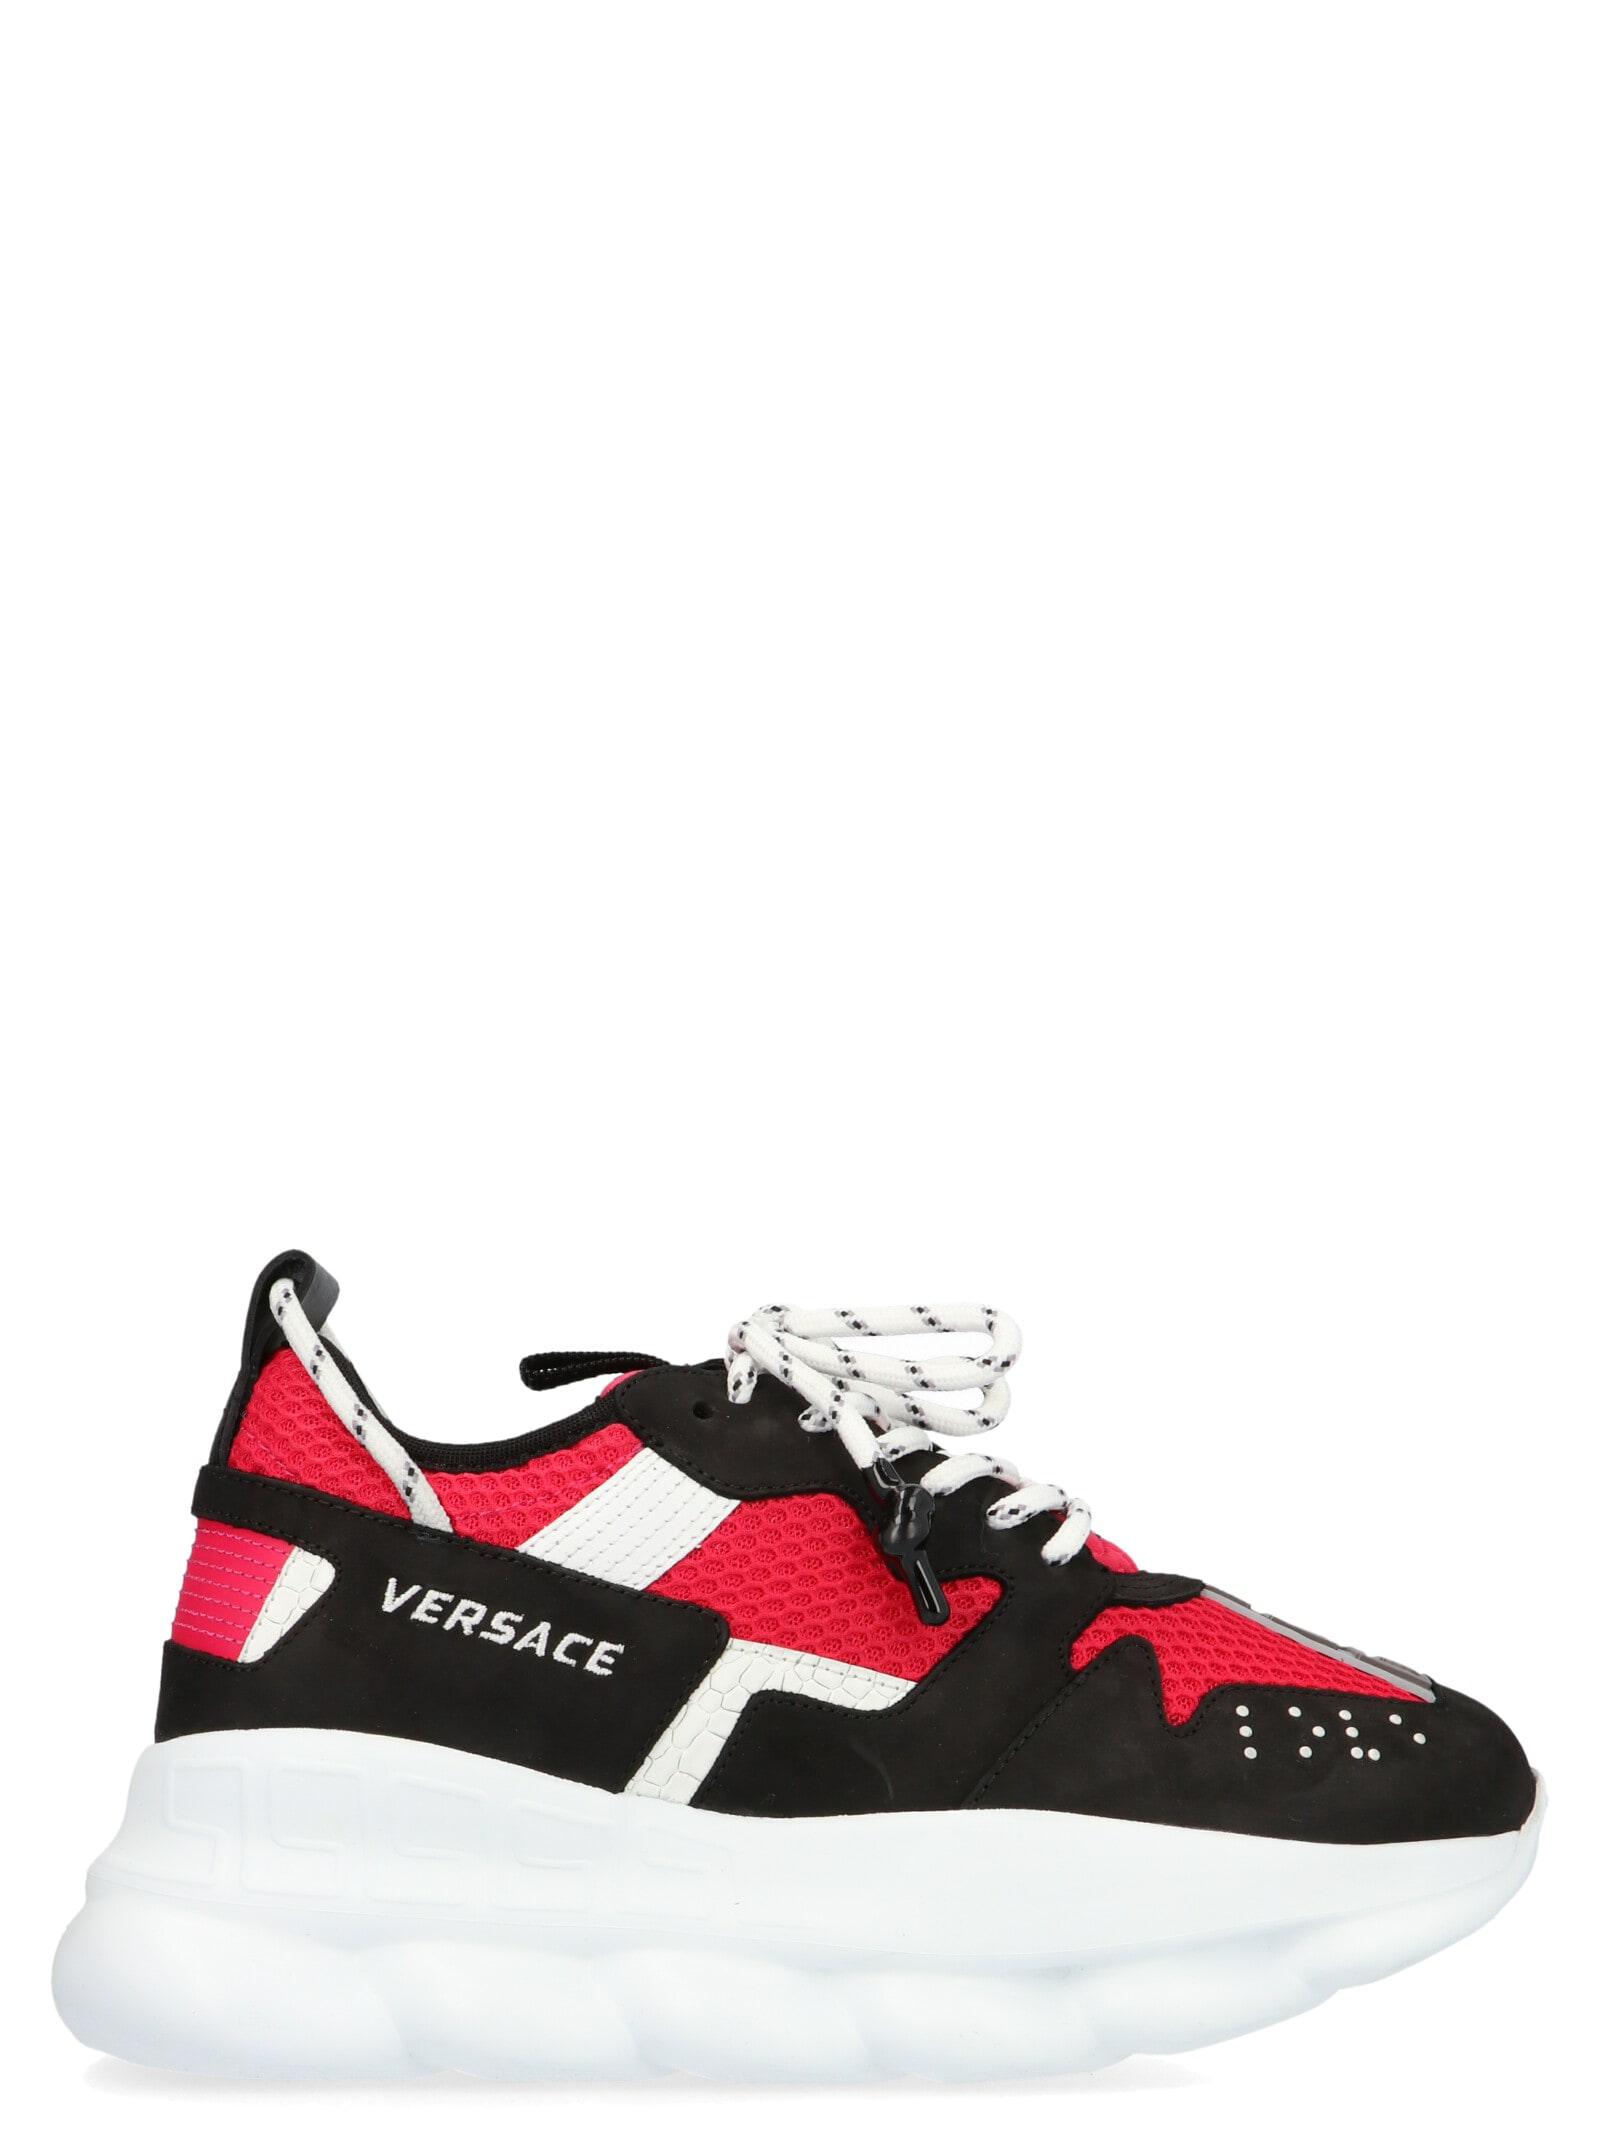 versace chain reaction sneakers sale